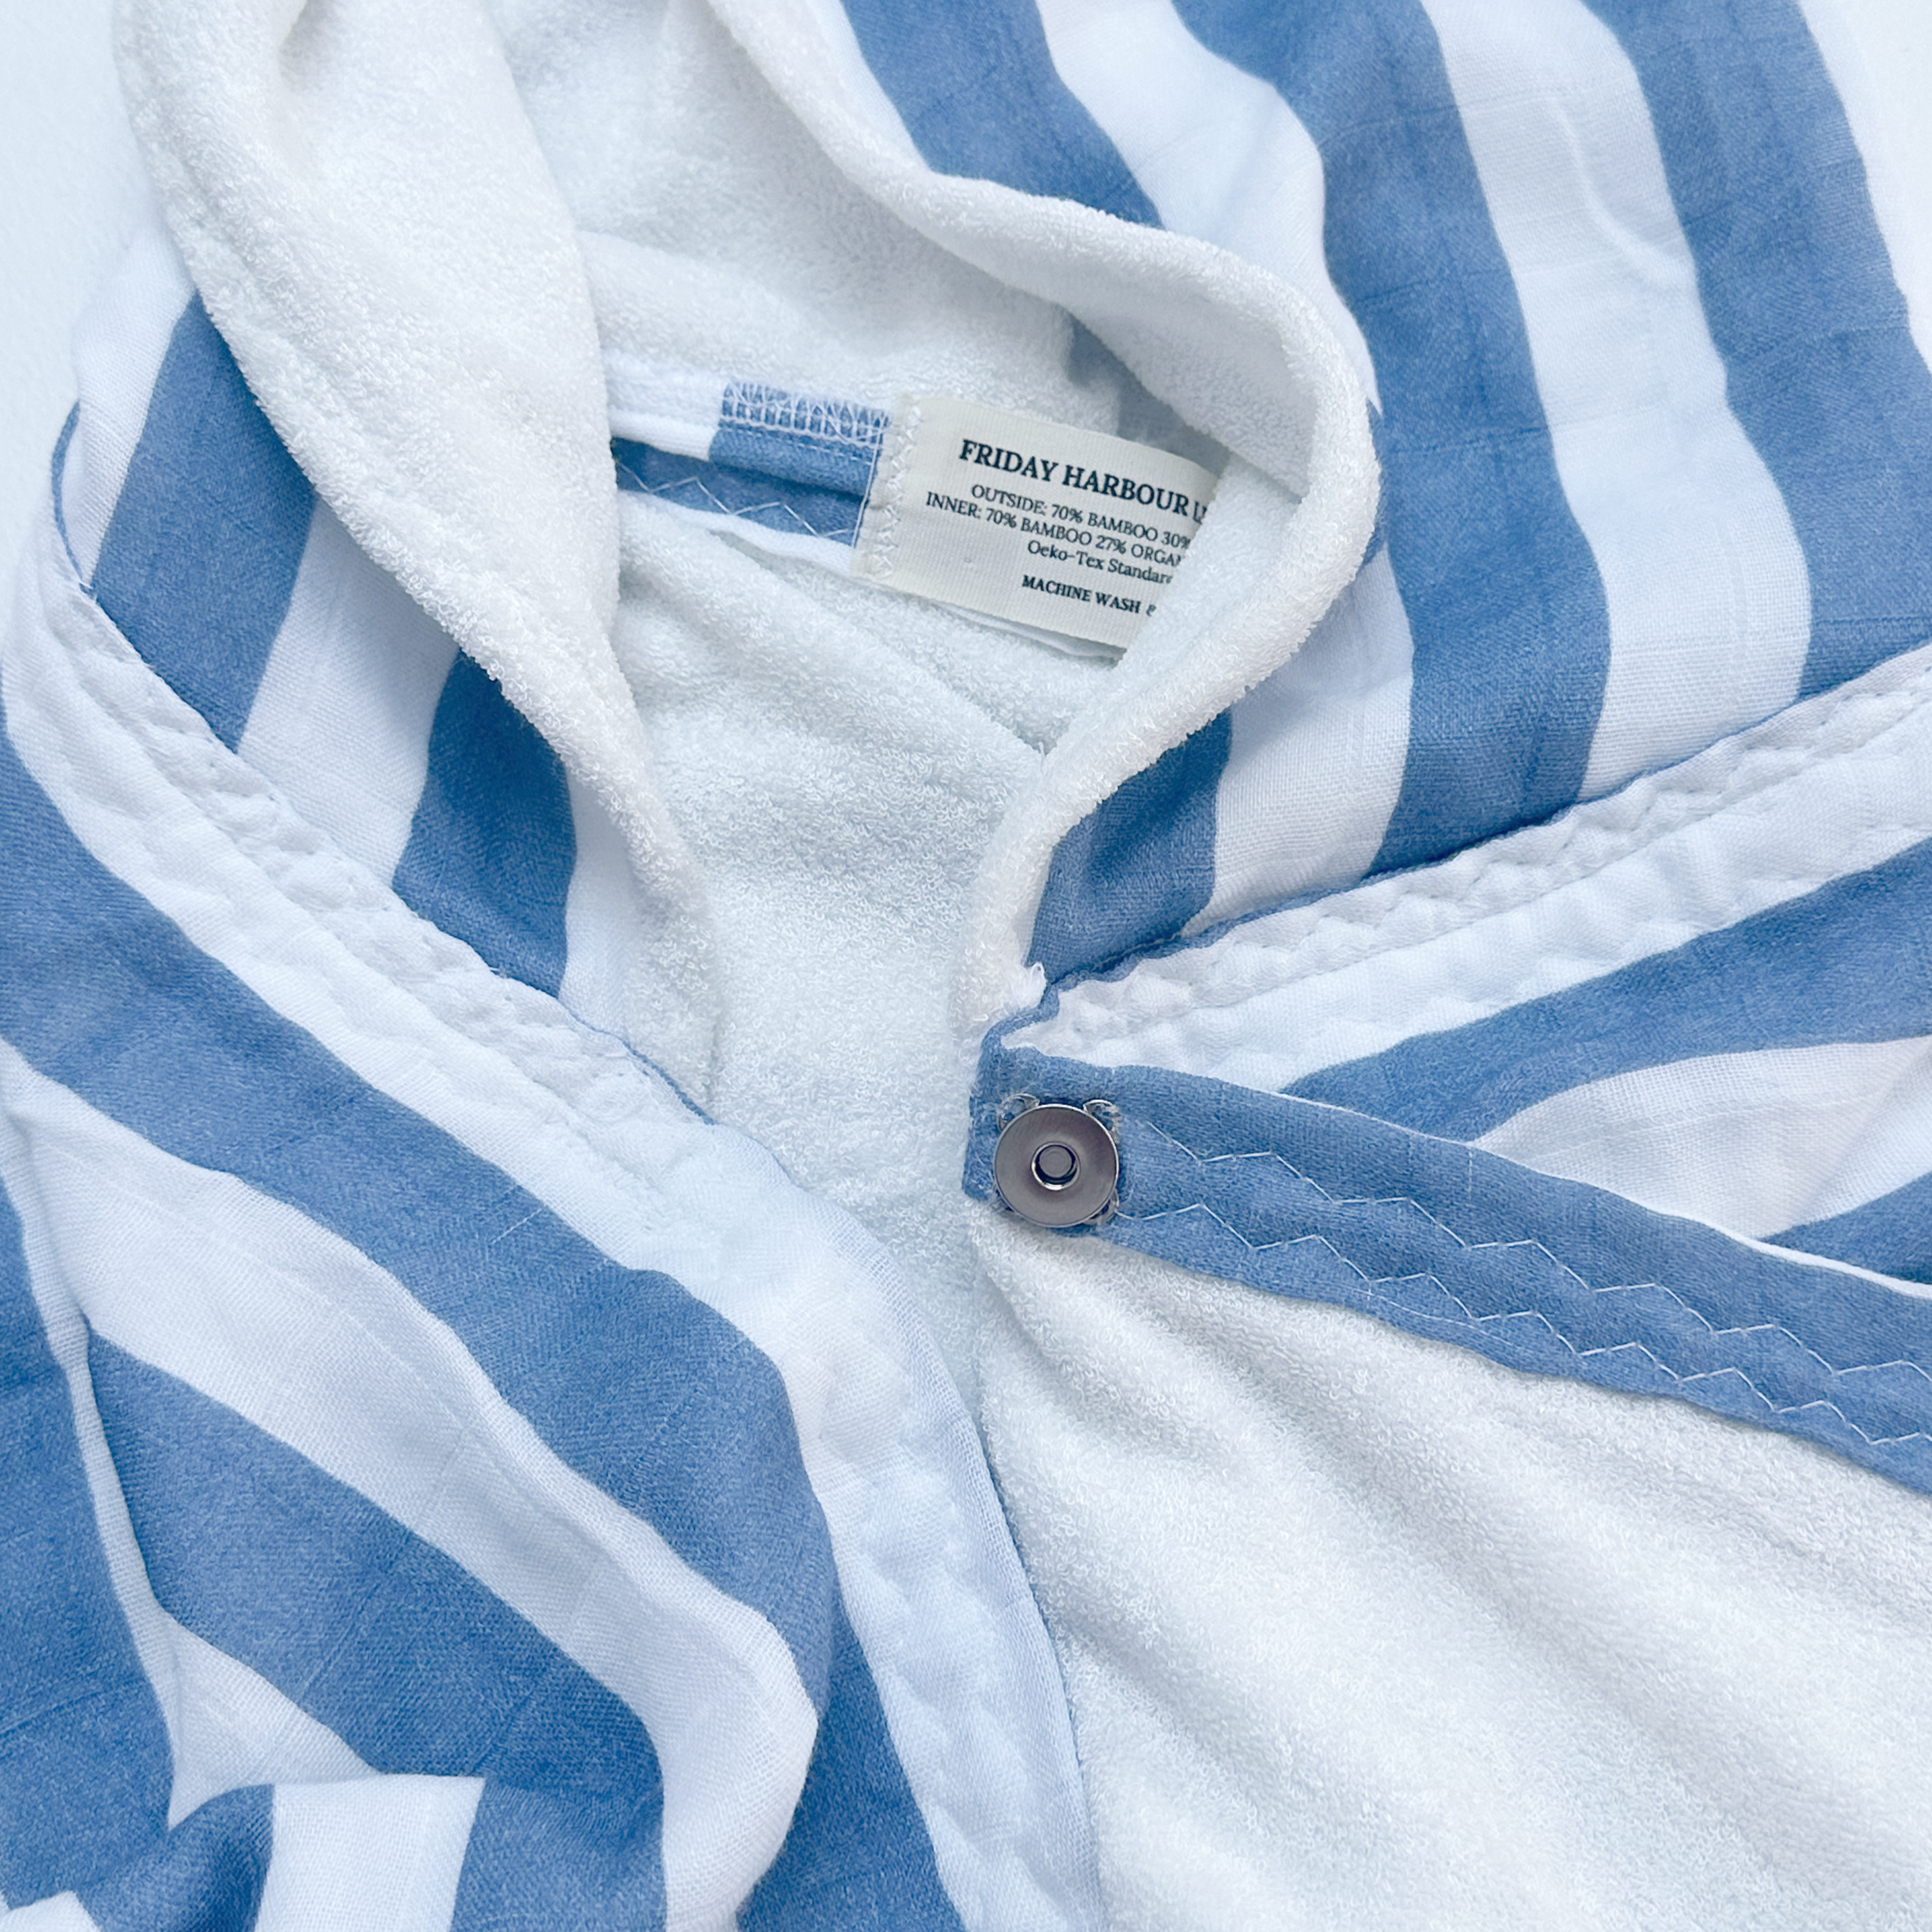 The Kids Cloud Towel - Blue & White Stripe - Friday Harbour Lifestyle Company 